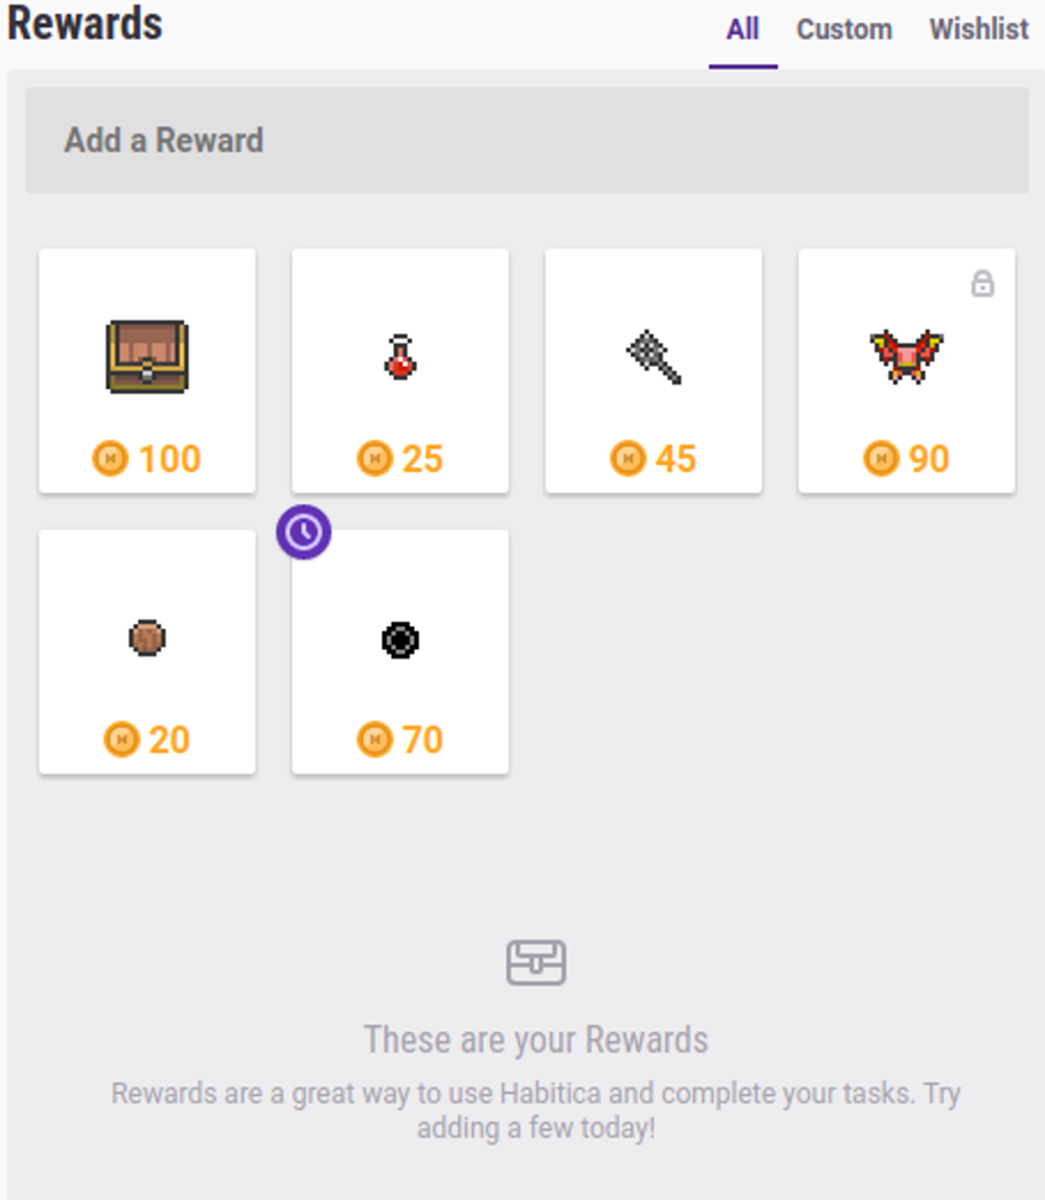 These are the items you can buy as rewards.